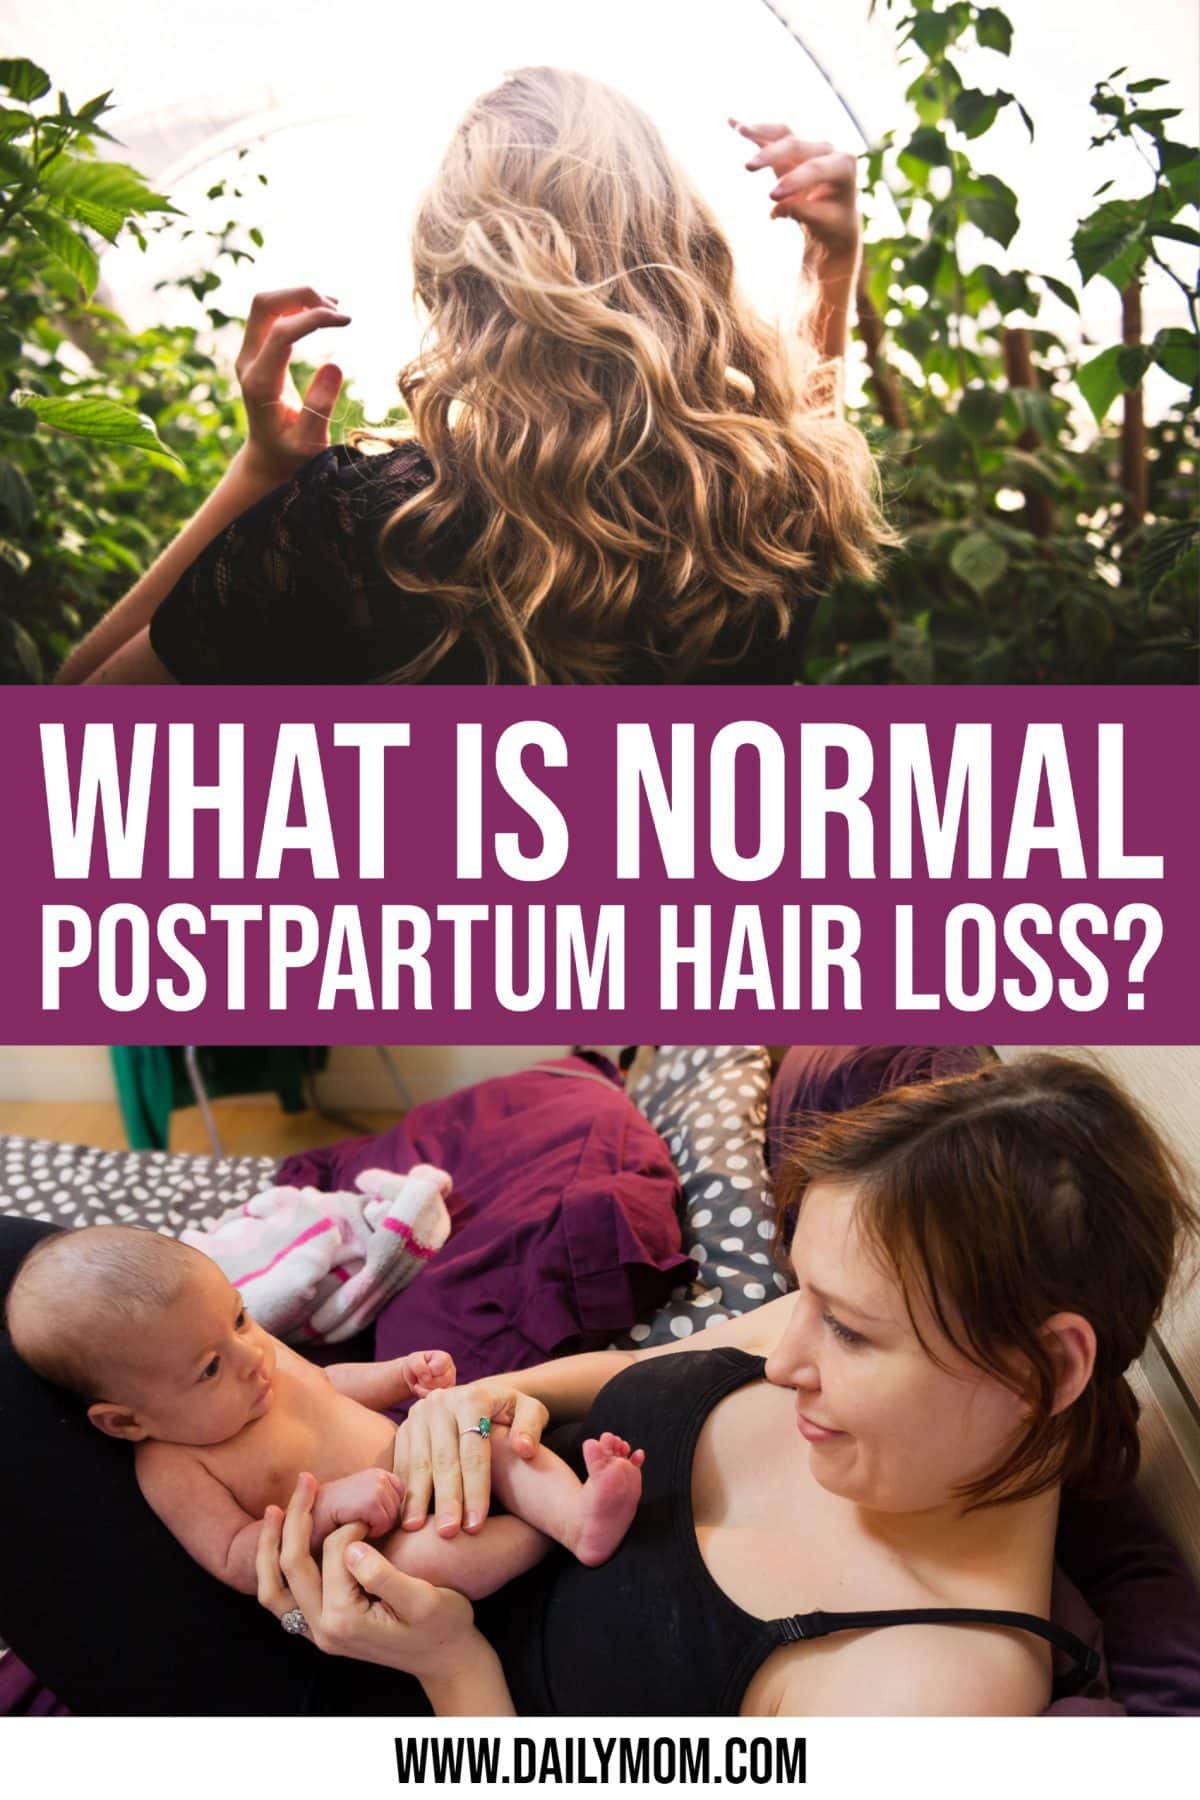 What Is Normal Postpartum Hair Loss?